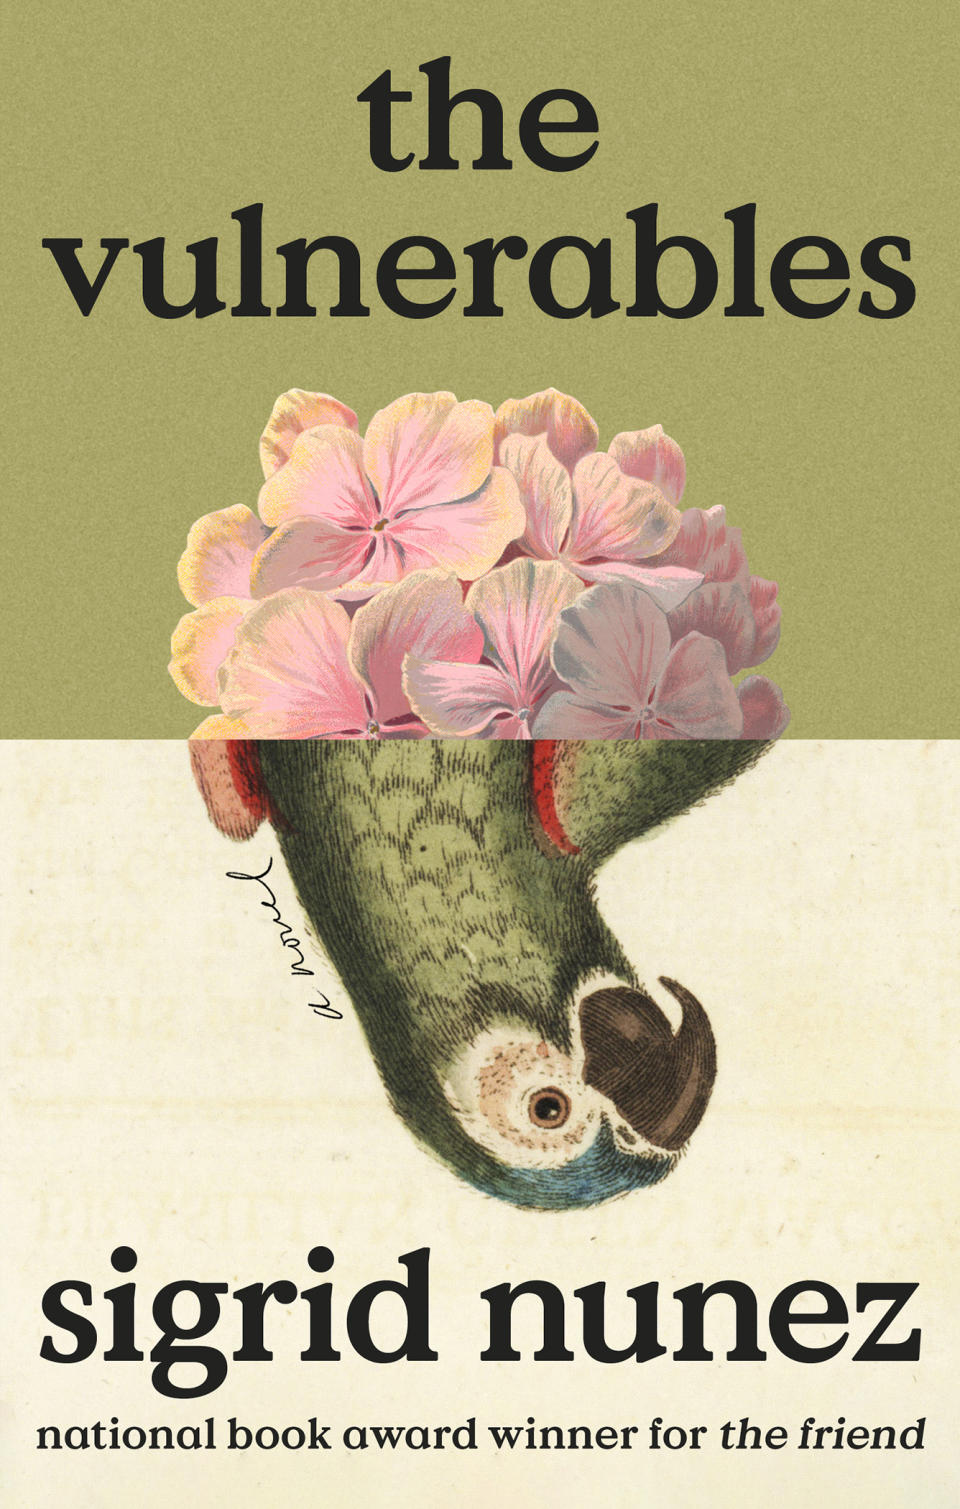 This cover image released by Riverhead Books shows "The Vulnerables" by Sigrid Nunez. (Riverhead Books via AP)